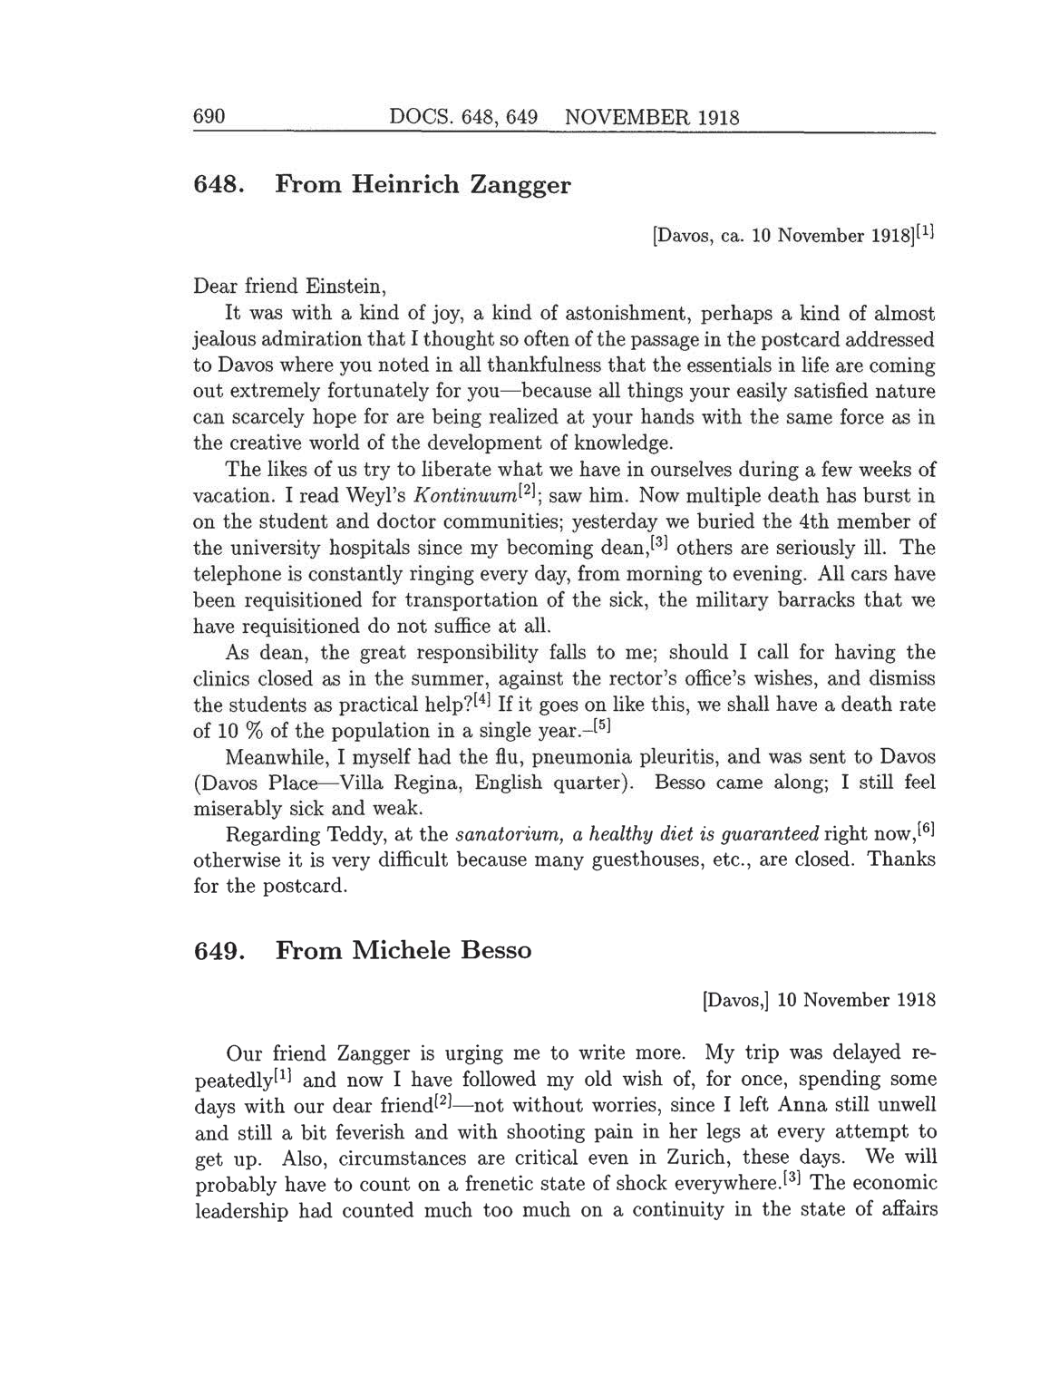 Volume 8: The Berlin Years: Correspondence, 1914-1918 (English translation supplement) page 690